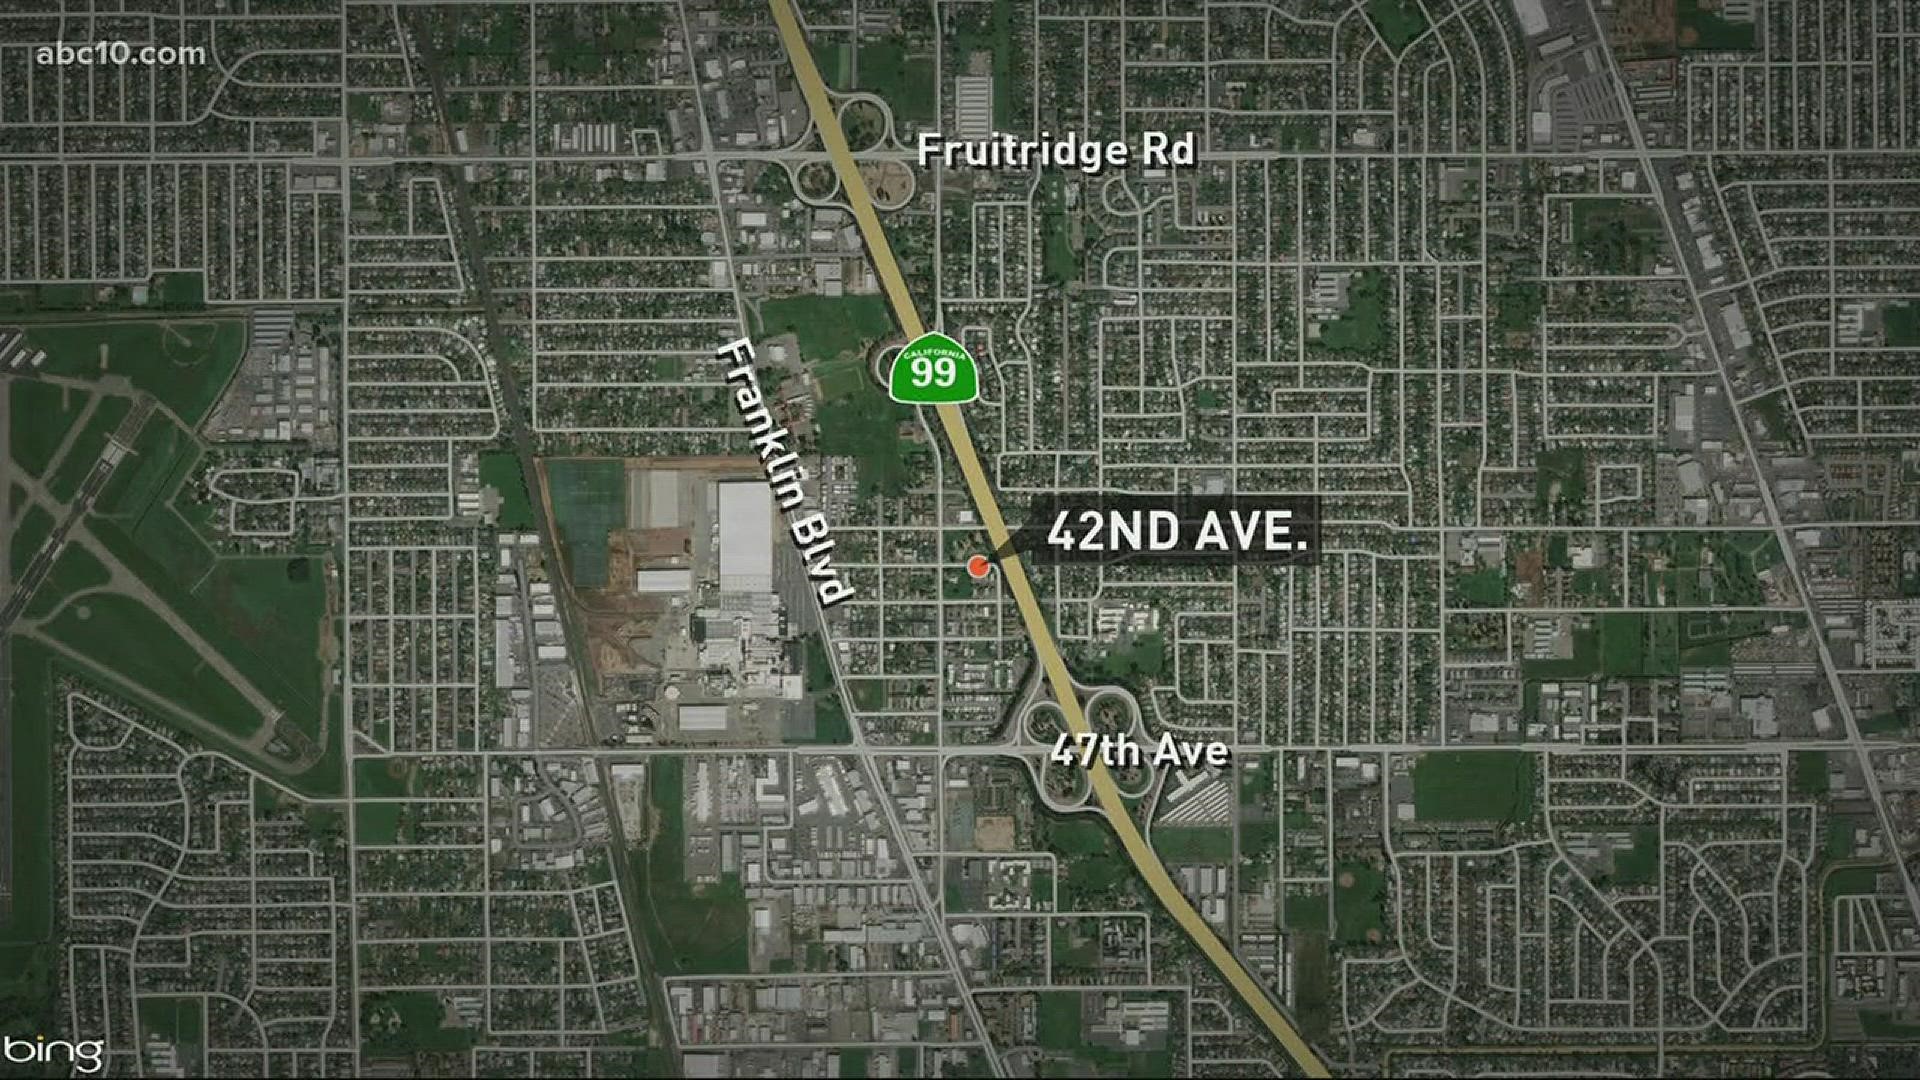 One person is dead and another was taken to the hospital after an early morning shooting in Sacramento.